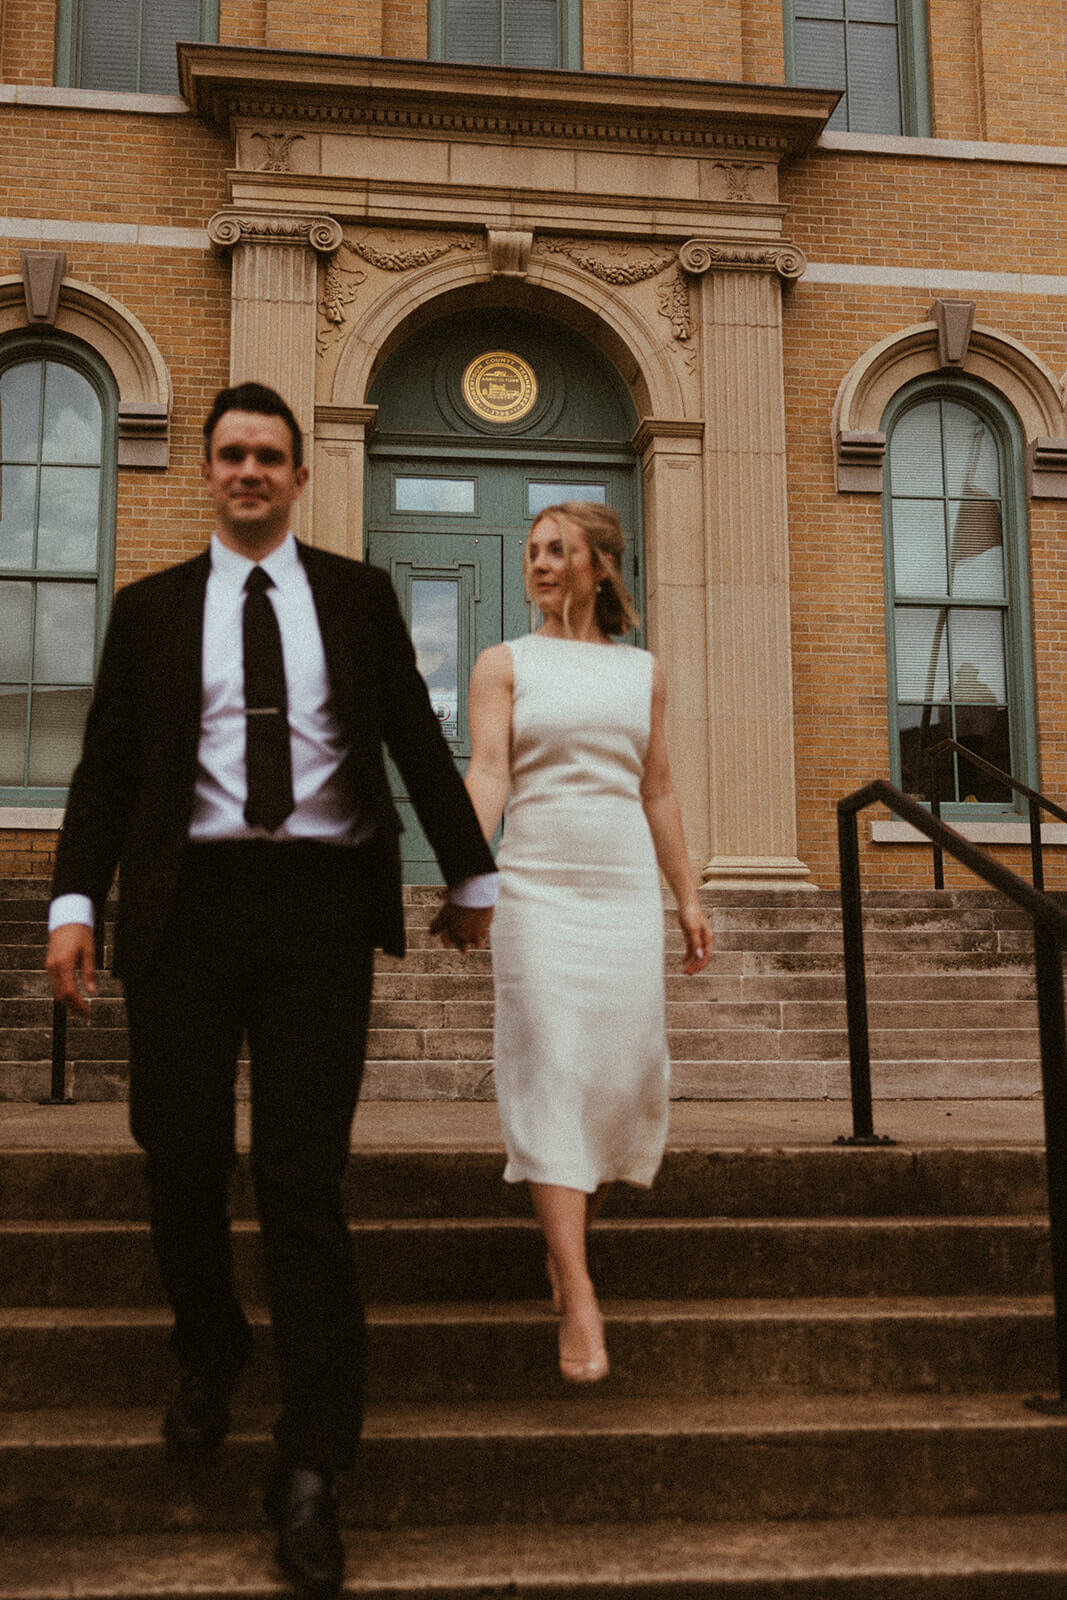 Bride and groom come down the steps of elegant courthouse wedding.